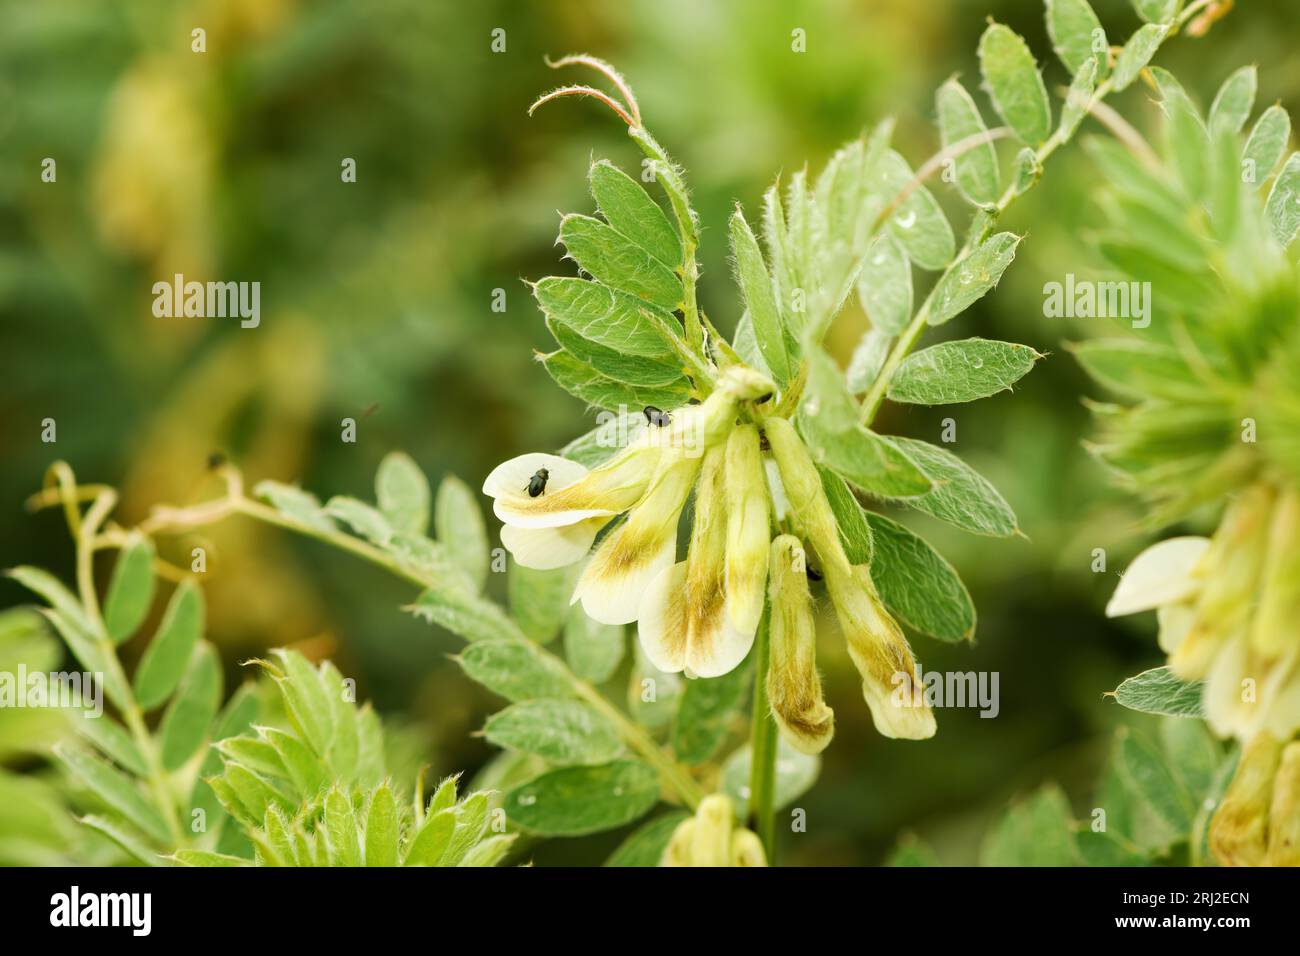 Closeup of hungarian vetch crops in field, selective focus Stock Photo